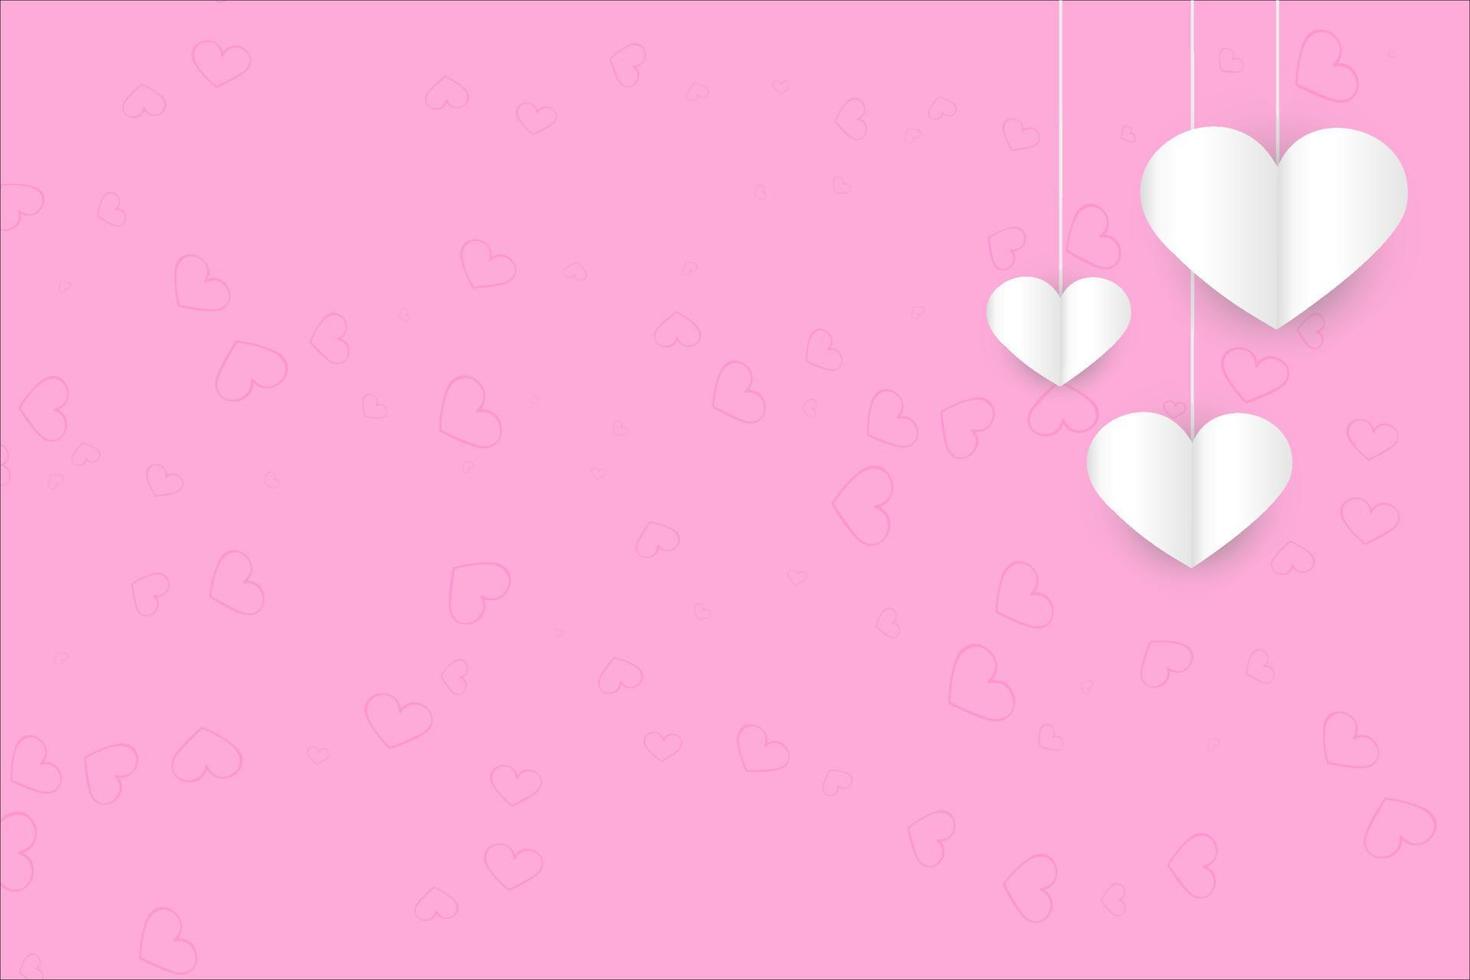 Three vector white paper hearts pendants on a pink background with hearts. Valentines day card